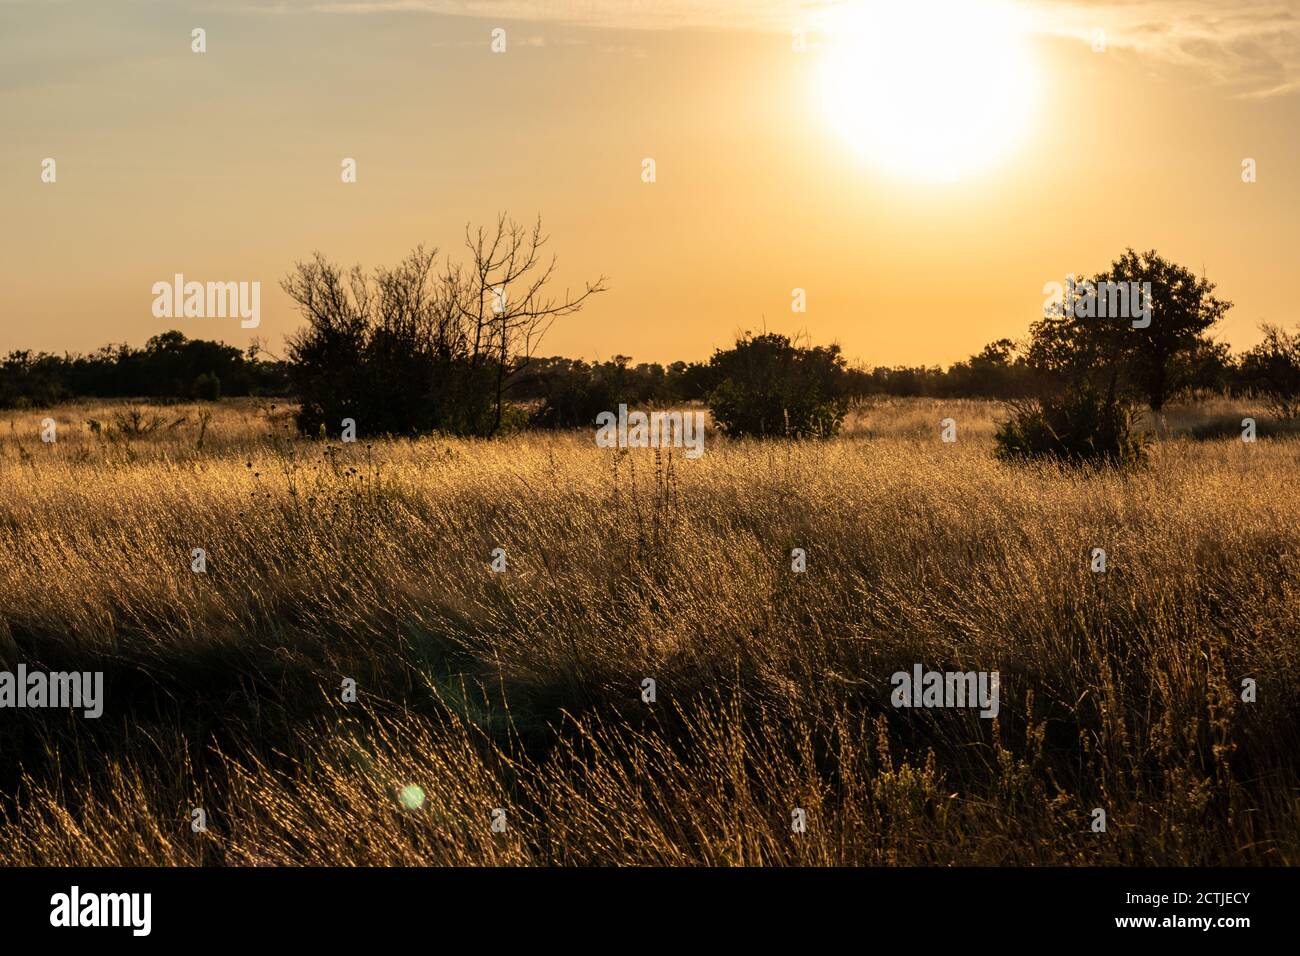 Sun dawn in rural area over the wild lawn with dry grass shining in sun rays and dark trees silhouettes in warm autumn vivid colors Stock Photo